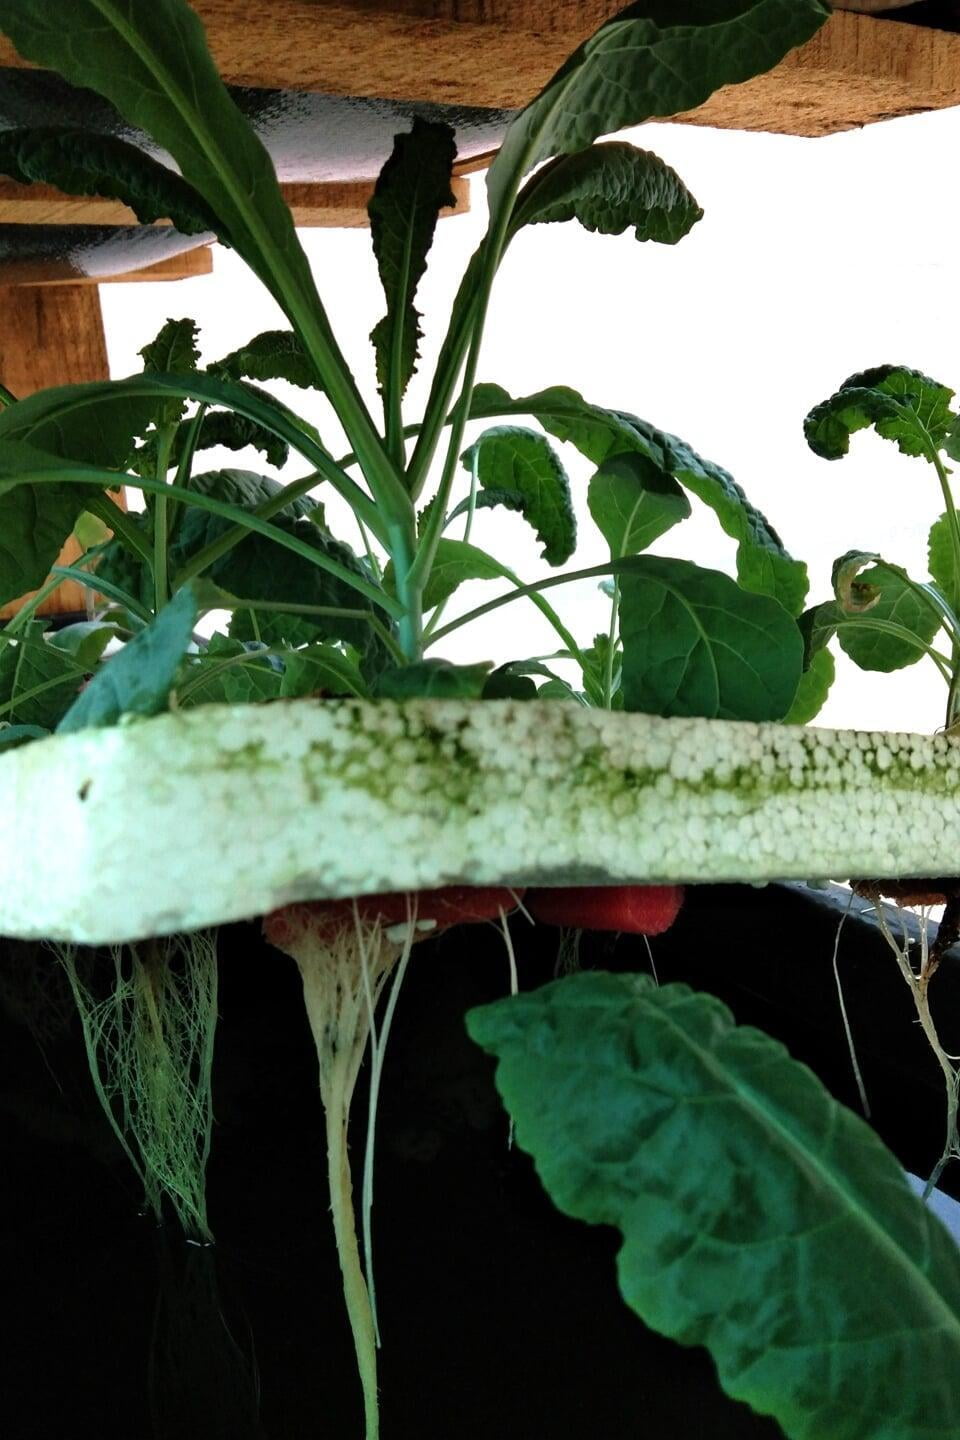 Our experiences with growing Kale in DWC Hydroponics.